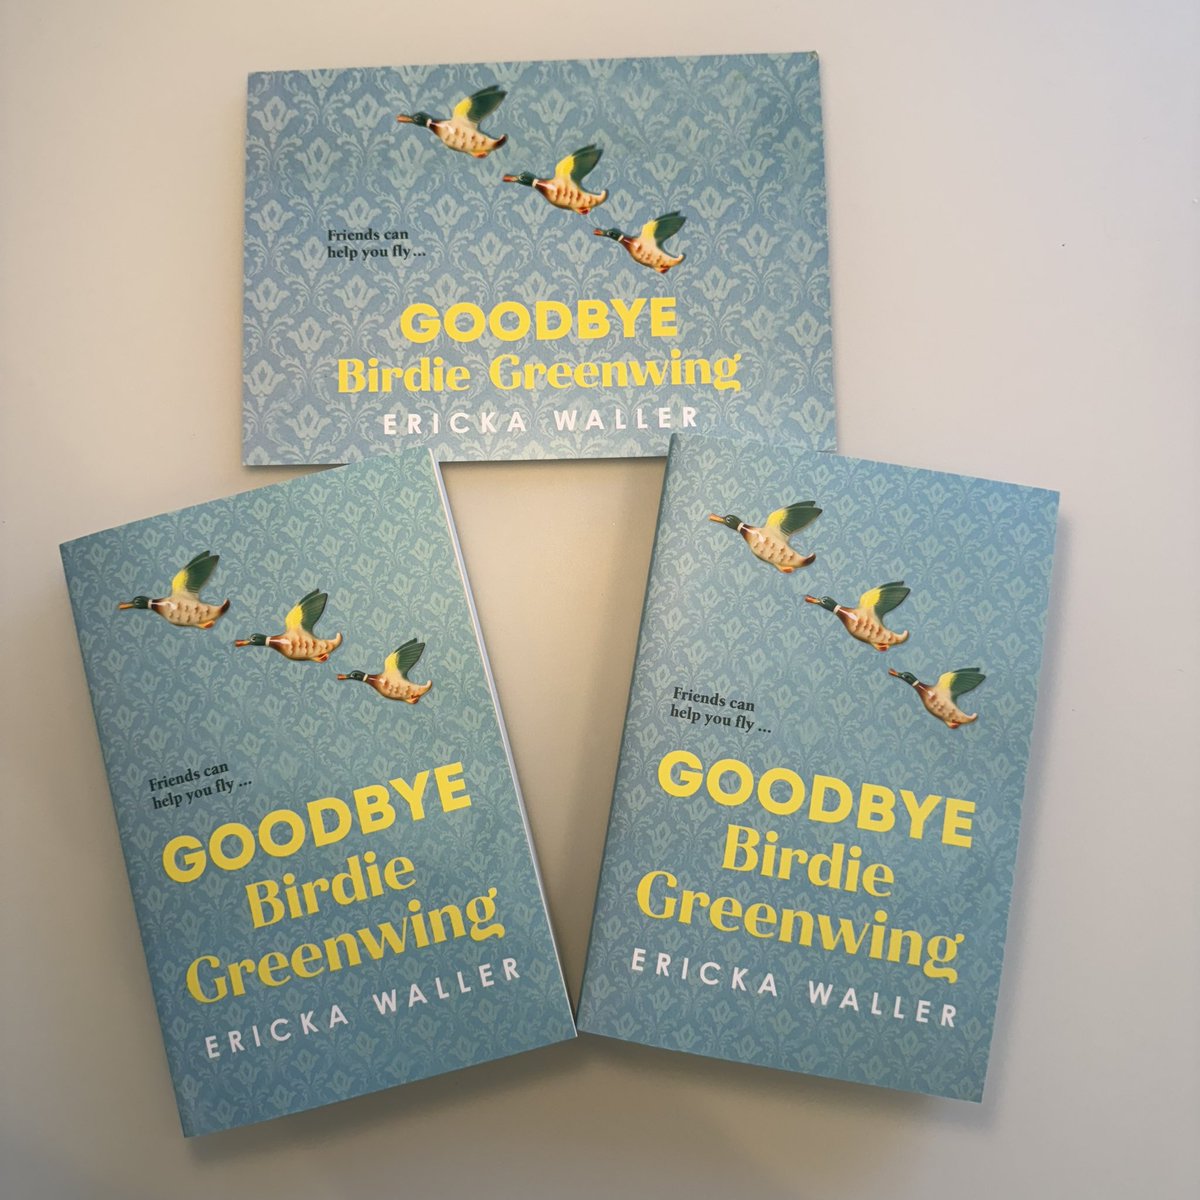 Feeling very spoilt - not one but two copies of #GoodbyeBirdieGreenwing by @ErickaWaller1. Can’t wait to read one and share the other. Thank you @Millsreid11 @DoubledayUK  - it is out on 18th April